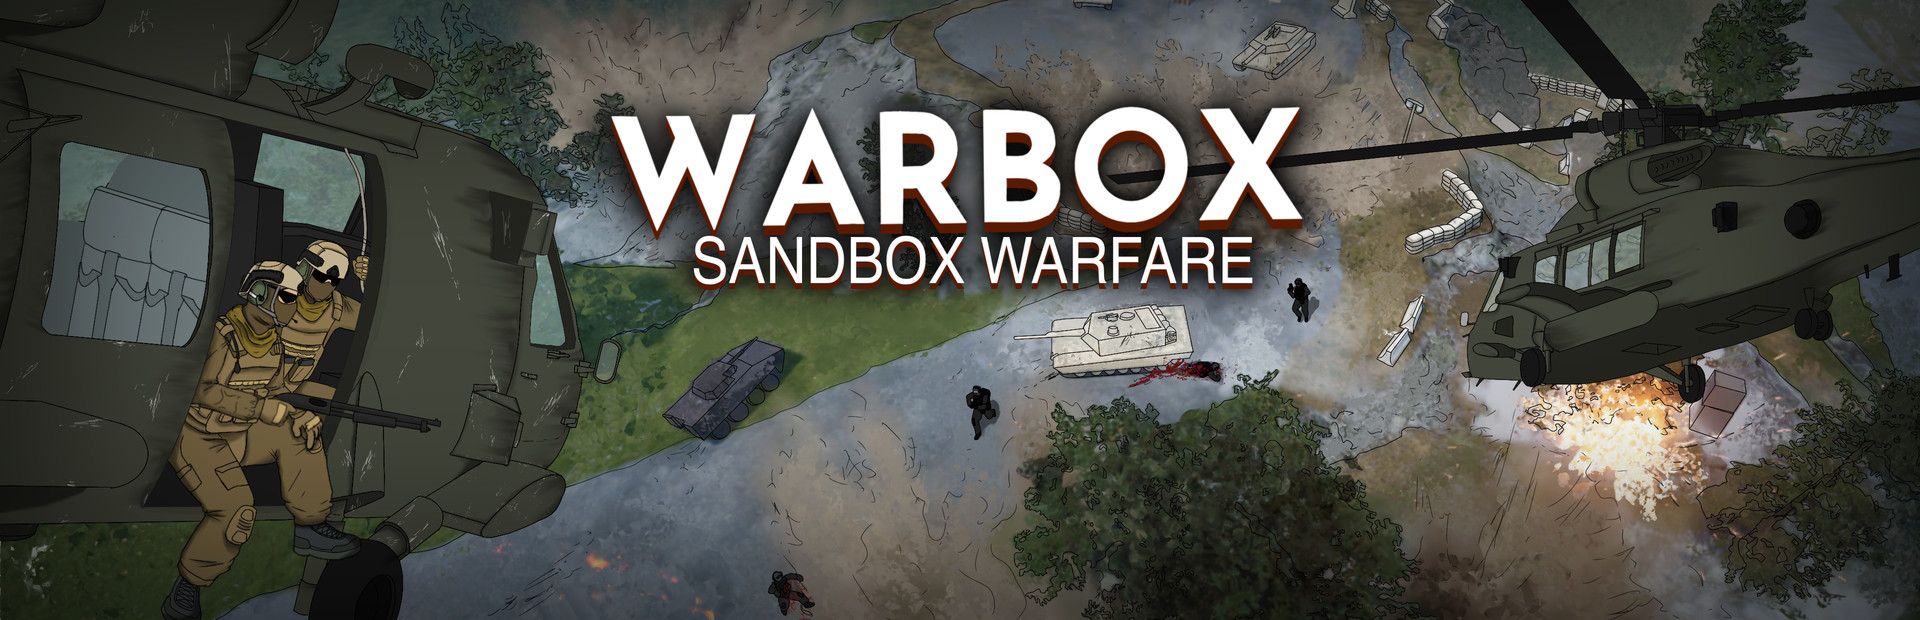 Warbox cover image